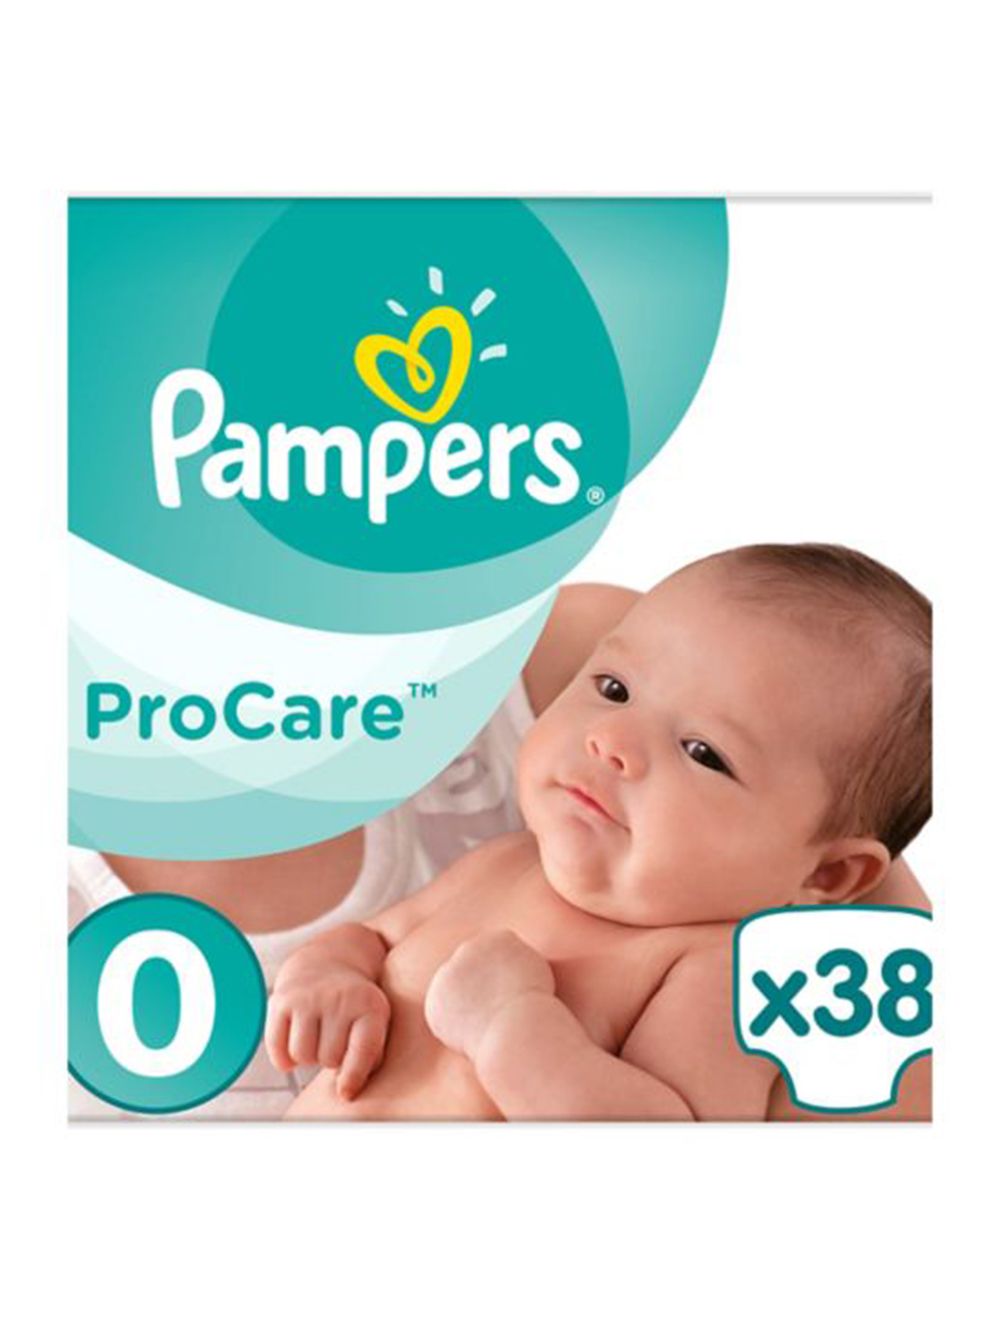 pampers new baby 1 2-5kg 43szt p&g-pampers